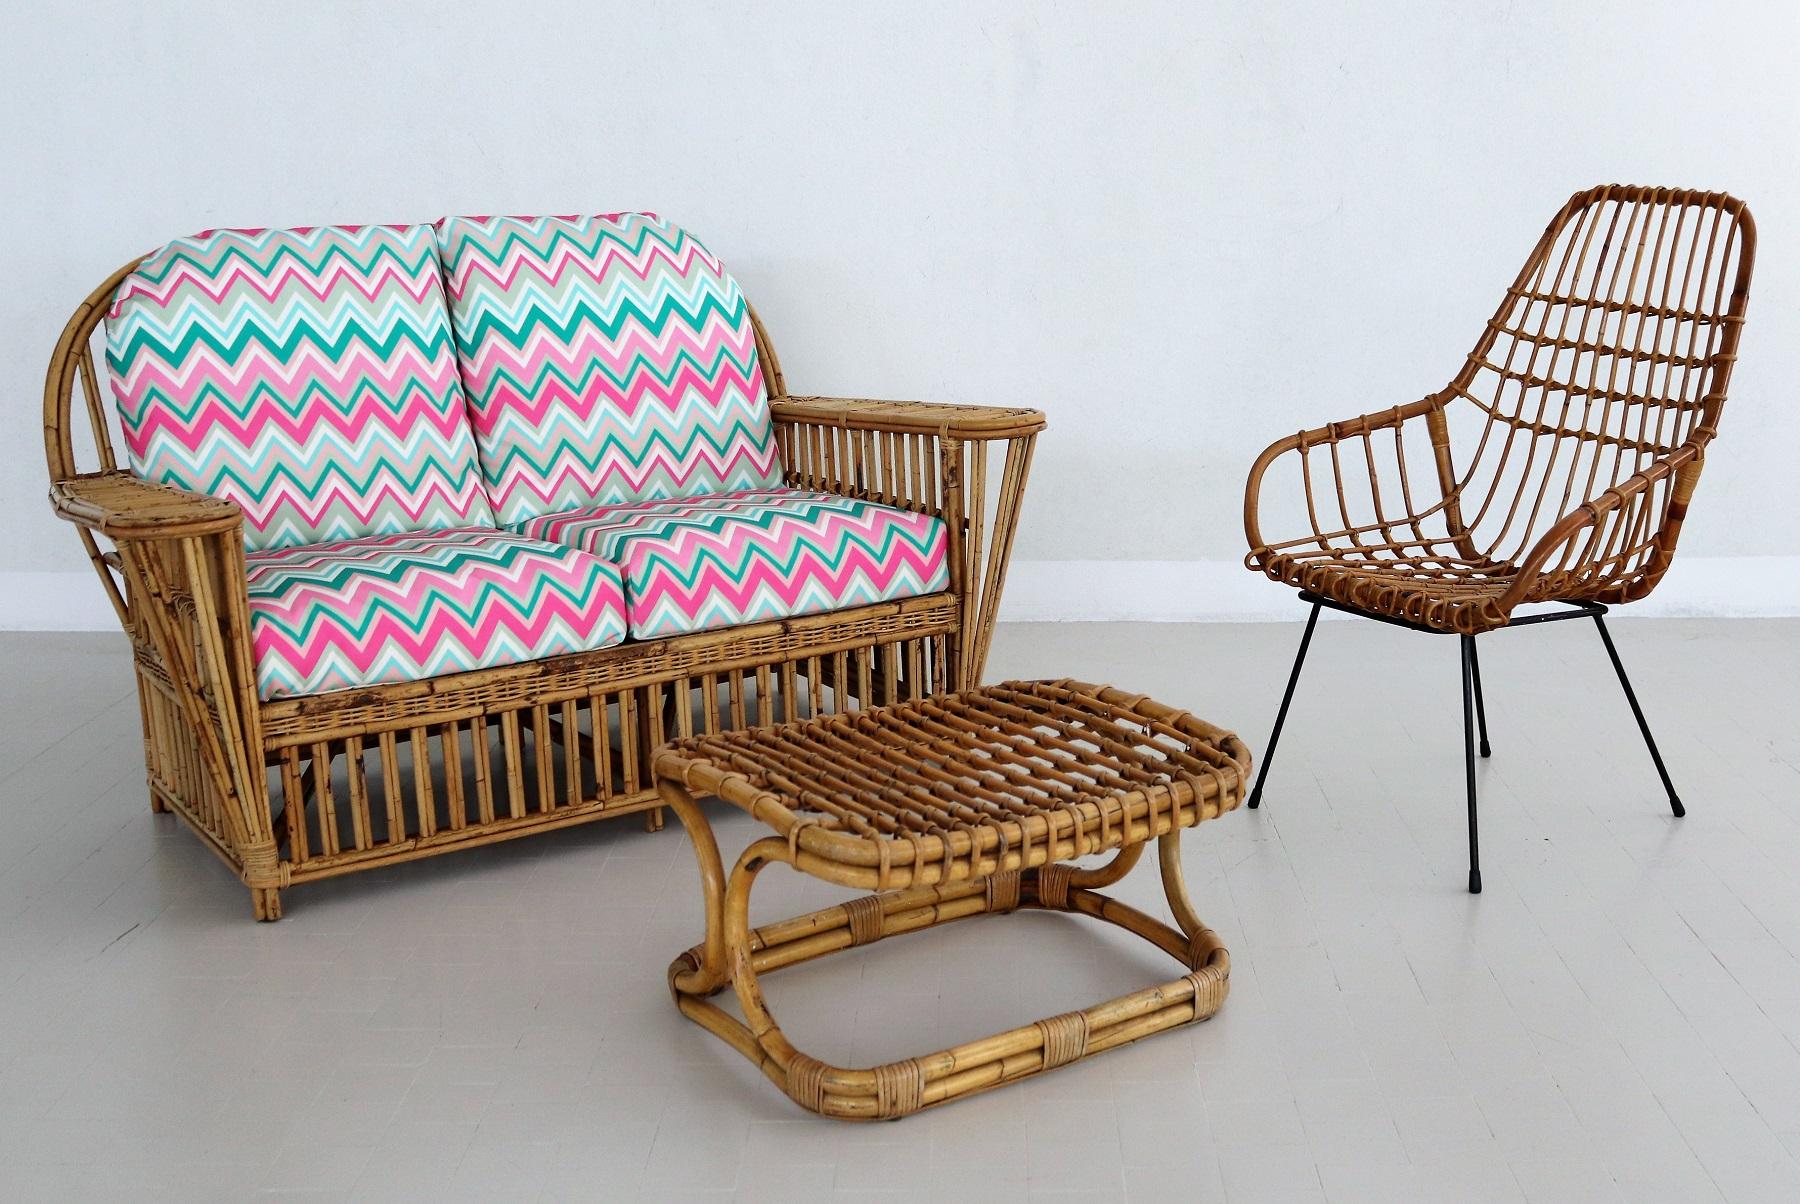 Gorgeous two-seater sofa made completely of bamboo and rattan in Italy, 1960s/1970s.
The sofa is in nearly excellent condition since it was placed inside the previous home.
The cushions have been upholstered with new outdoor fabric in colorful